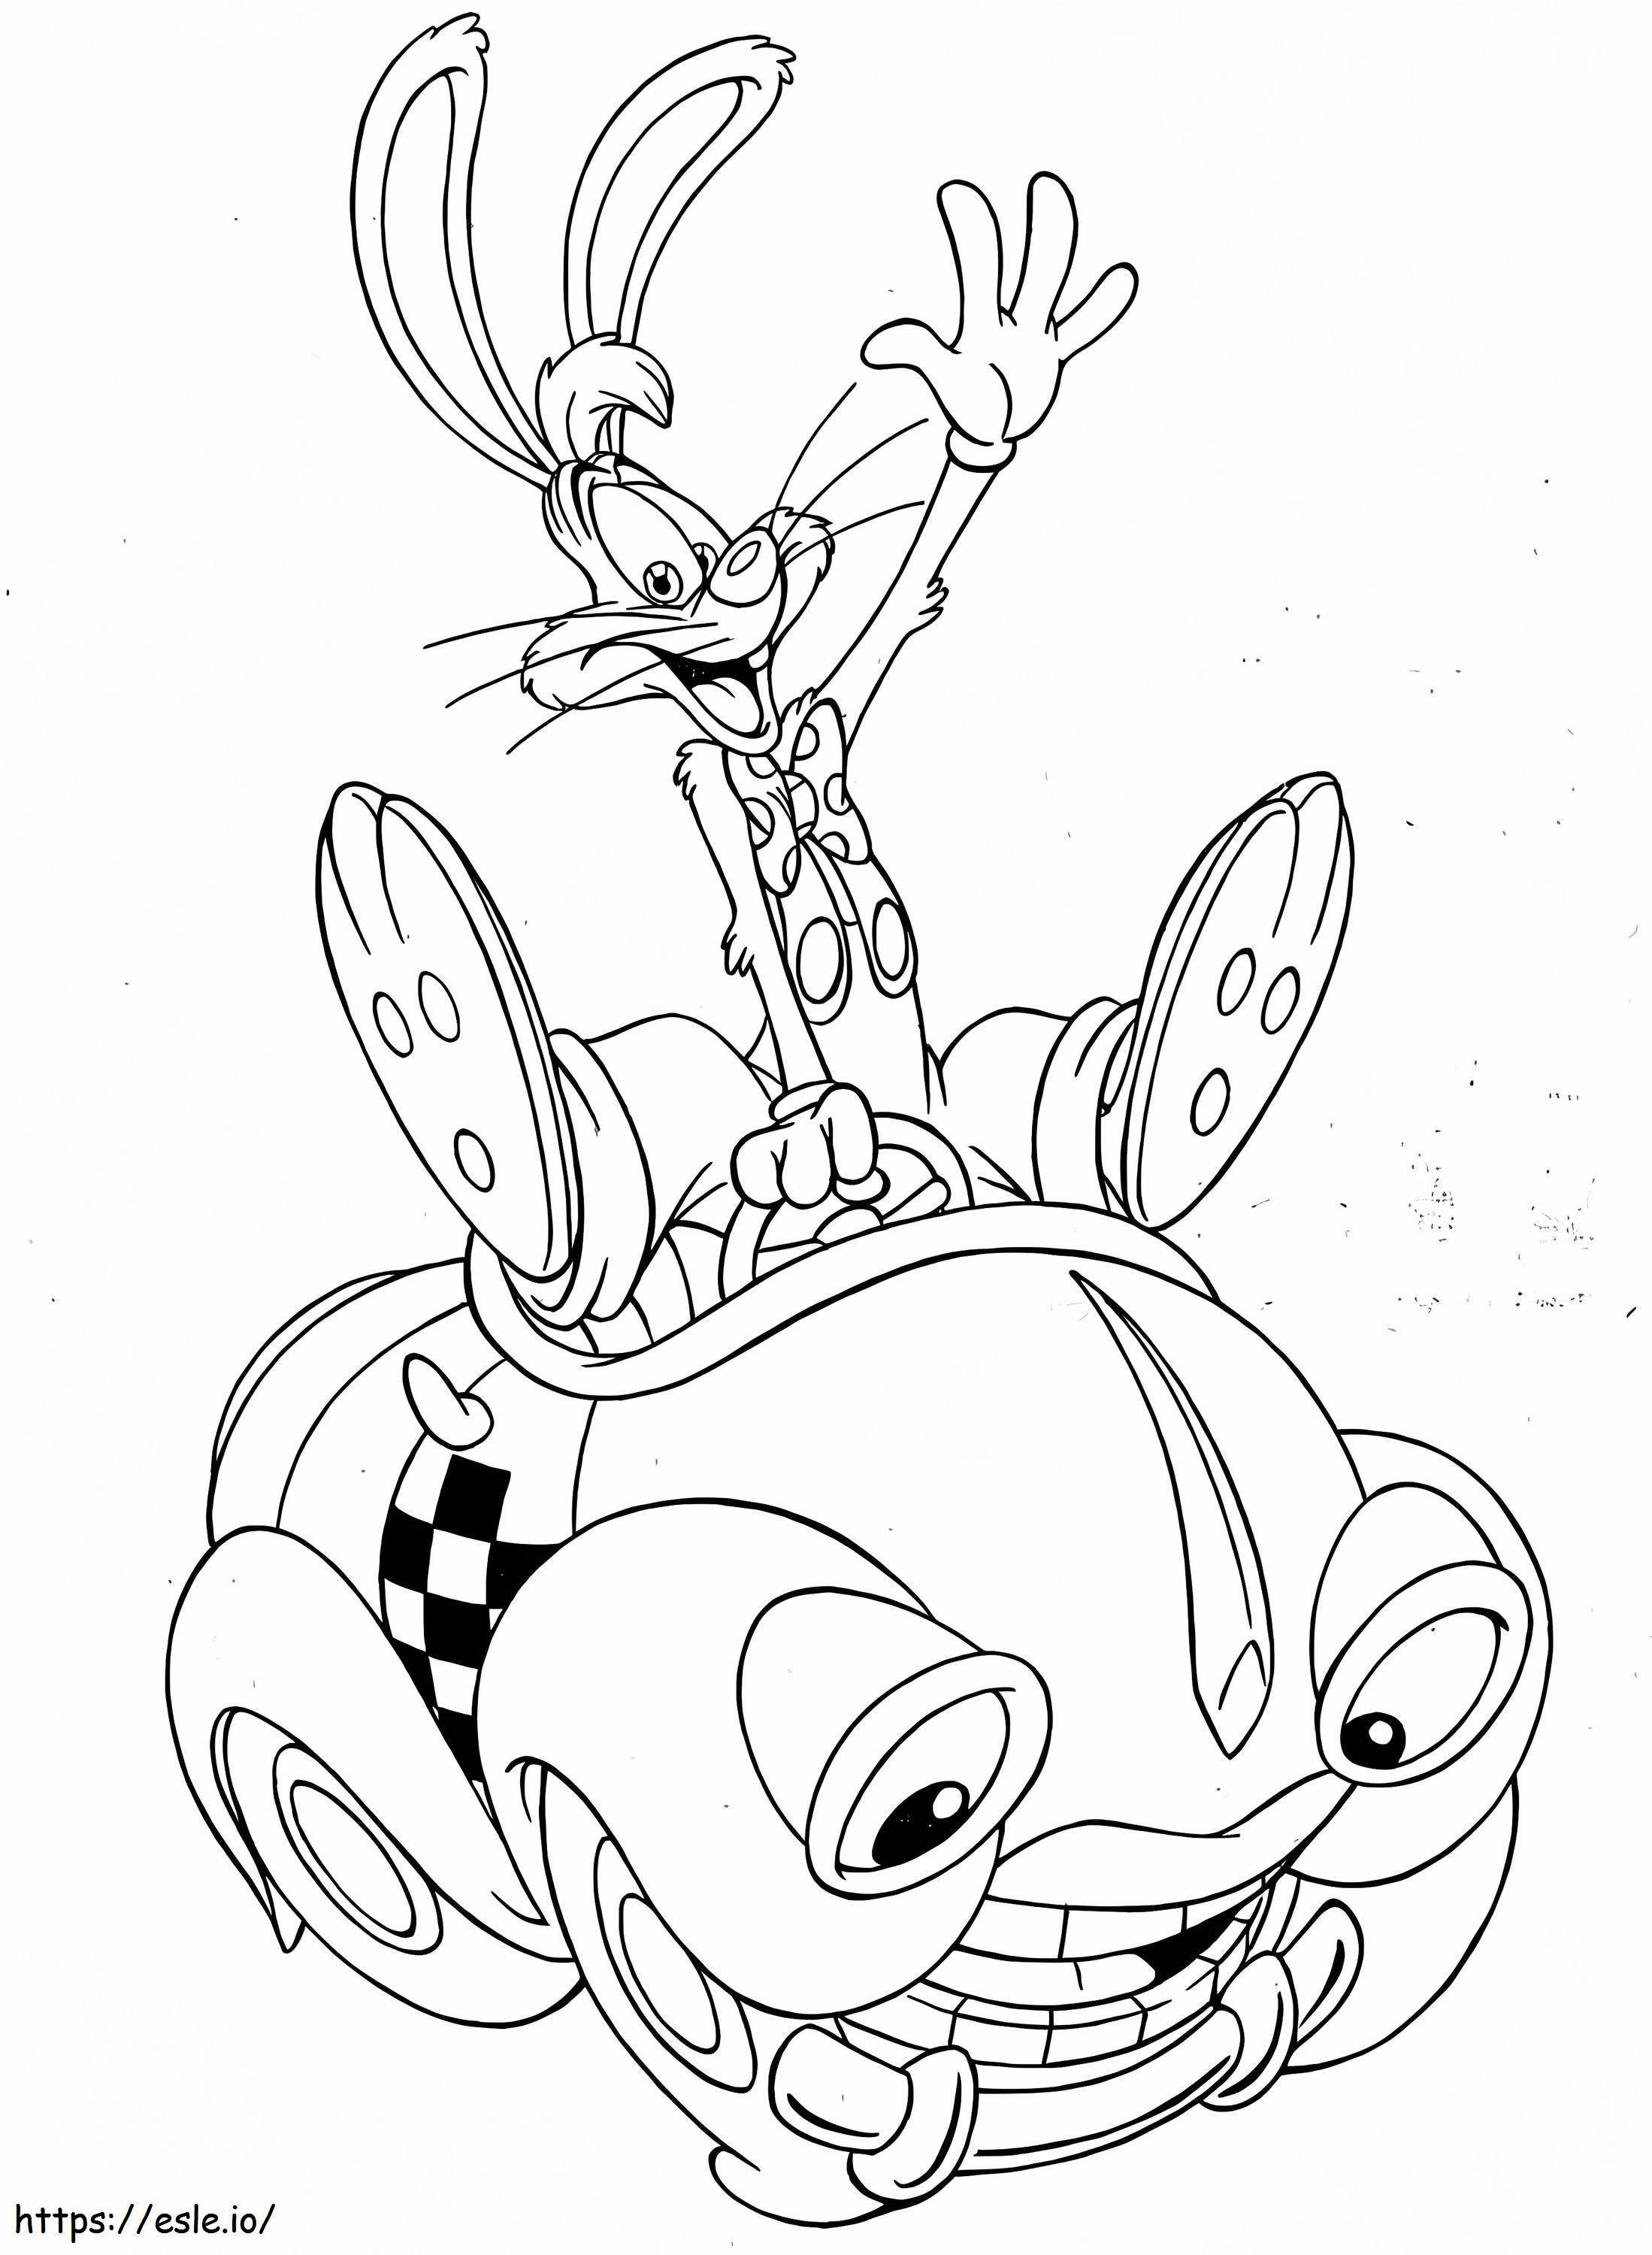 Benny The Cab And Roger Rabbit coloring page